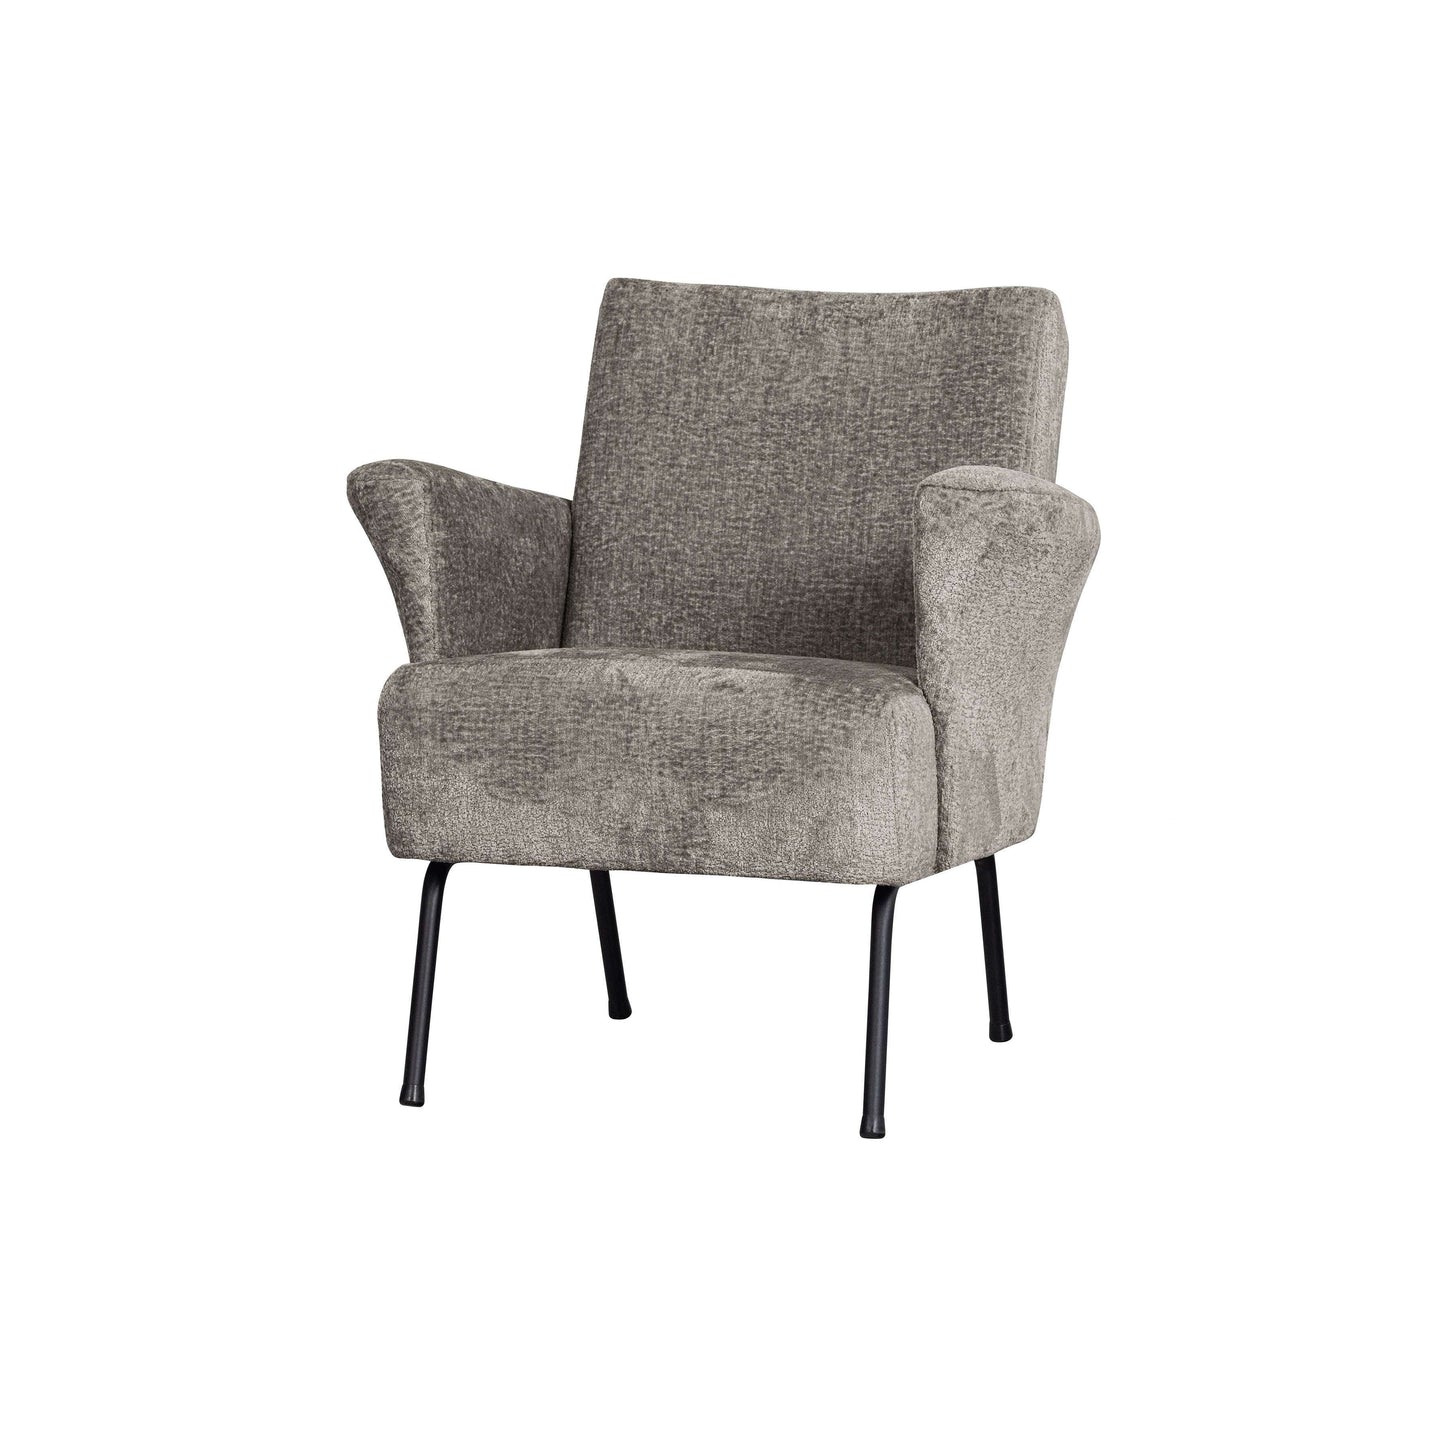 BePureHome Muse fauteuil taupe